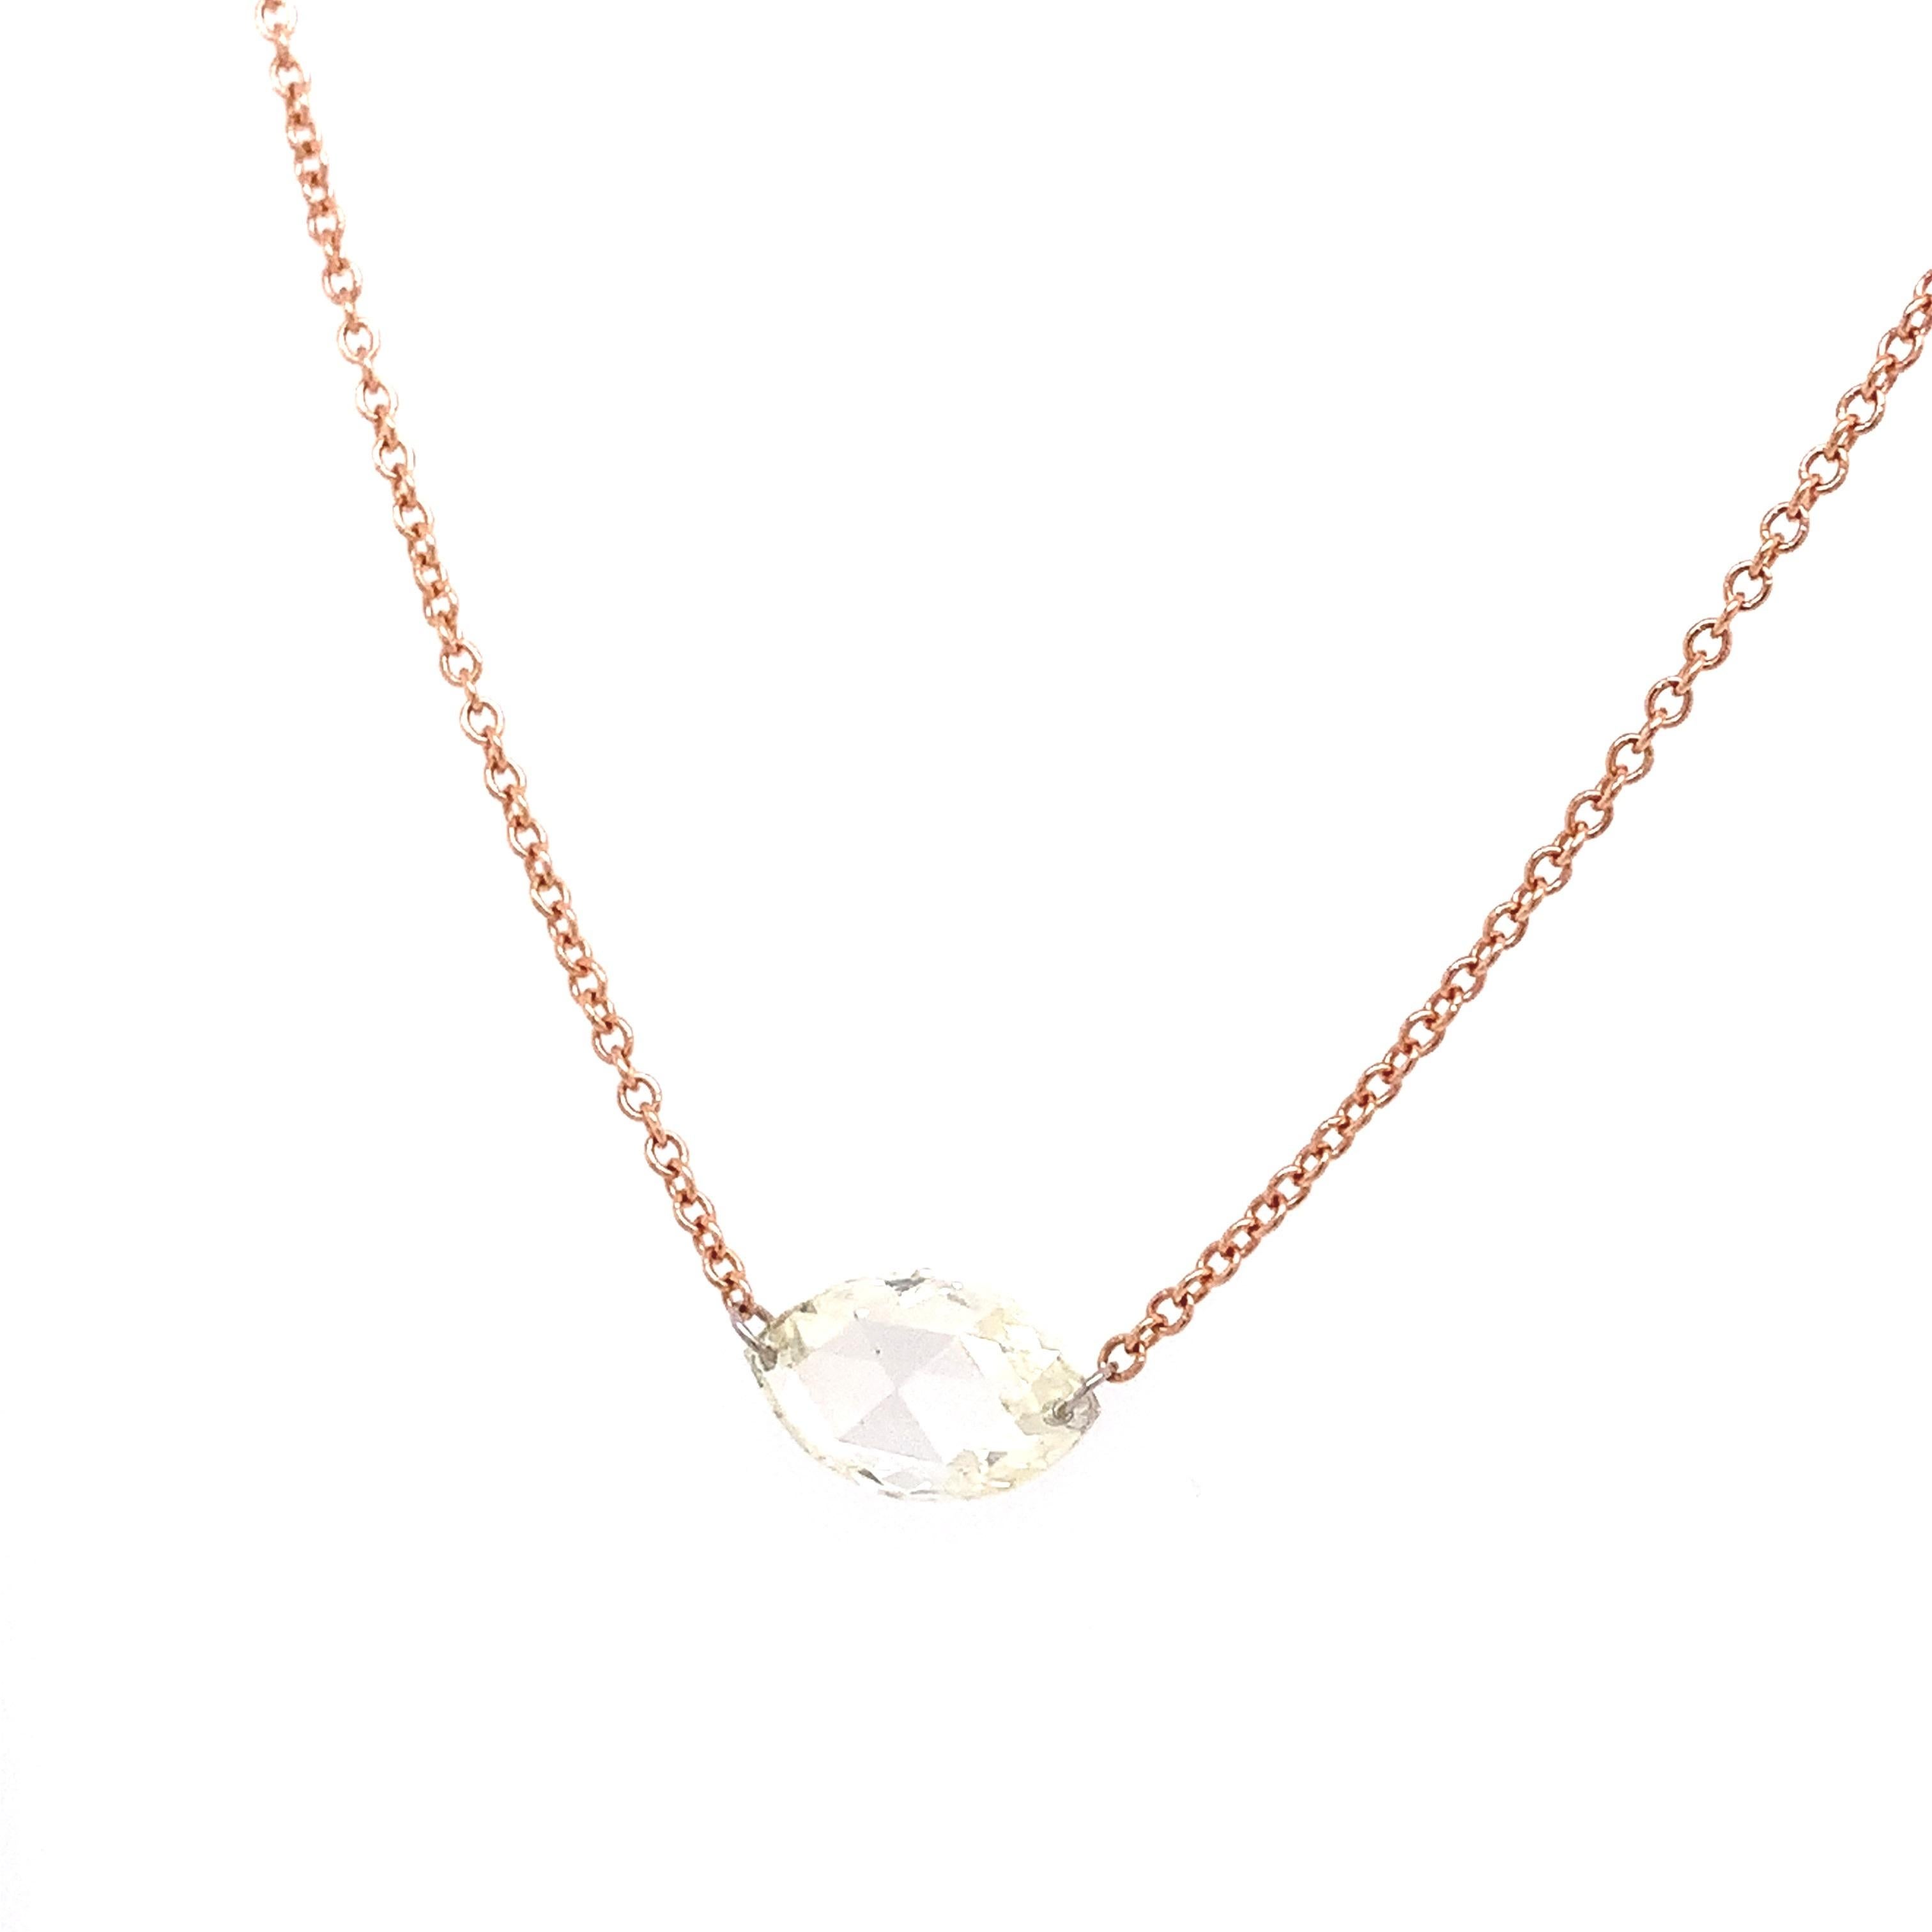 Dainty Collection

A delicate Rose Gold necklace exuding elegance and refined simplicity with the magnificent beauty of a 0.76 carat Rose Cut Diamond.